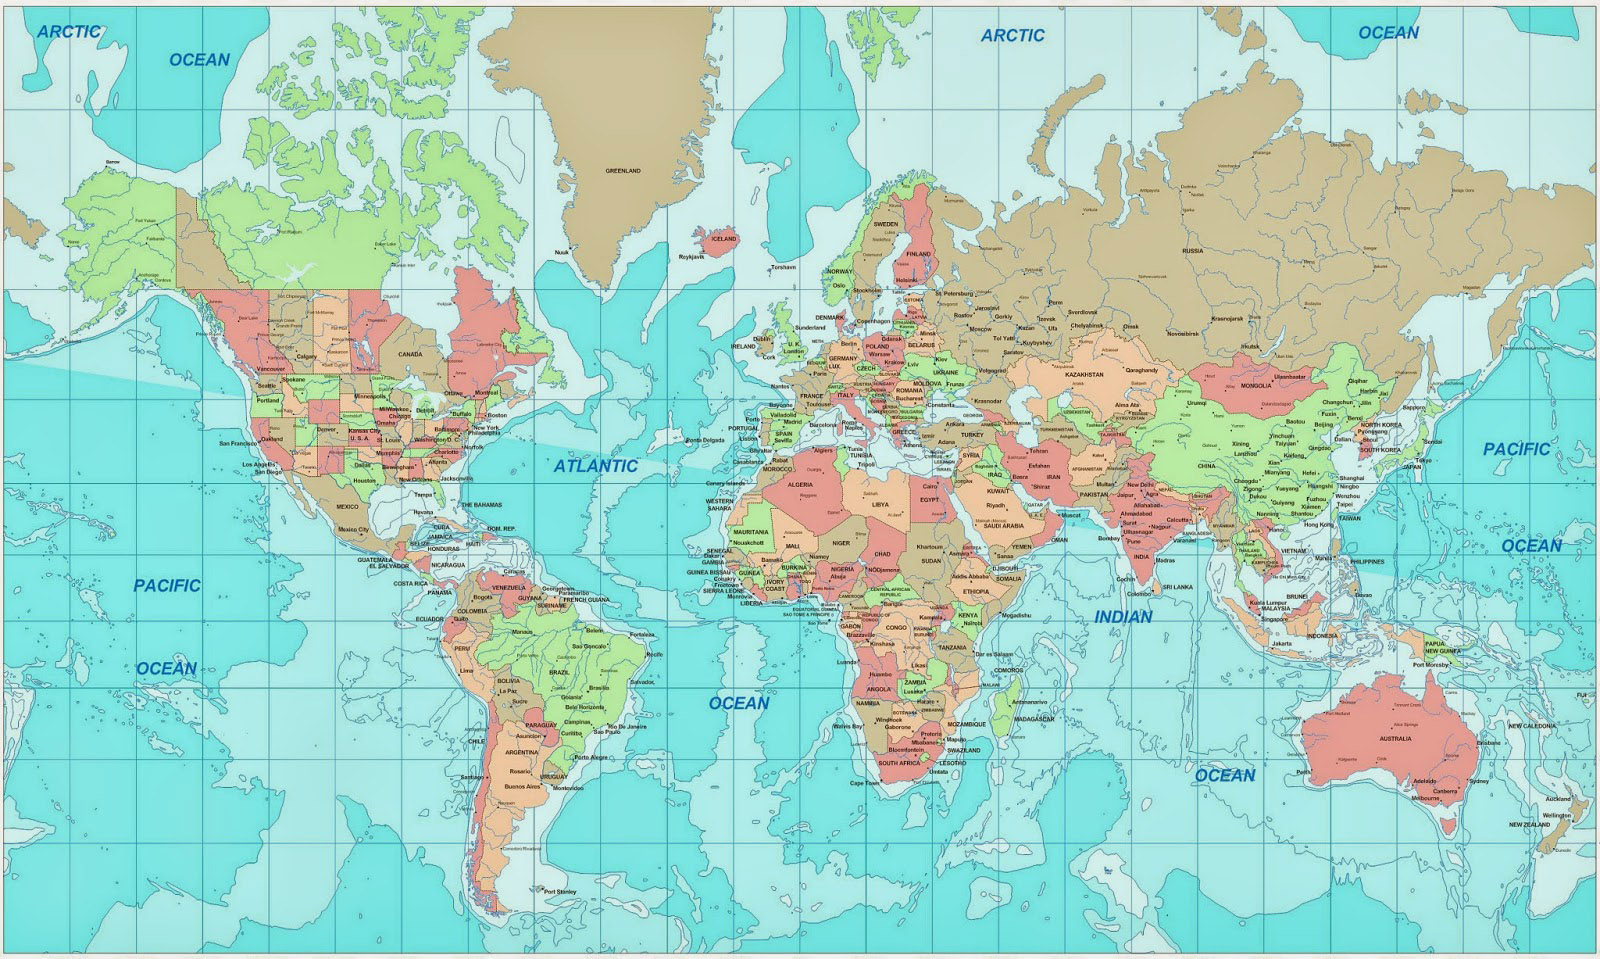 Free Printable World Map Poster For Kids In Pdf